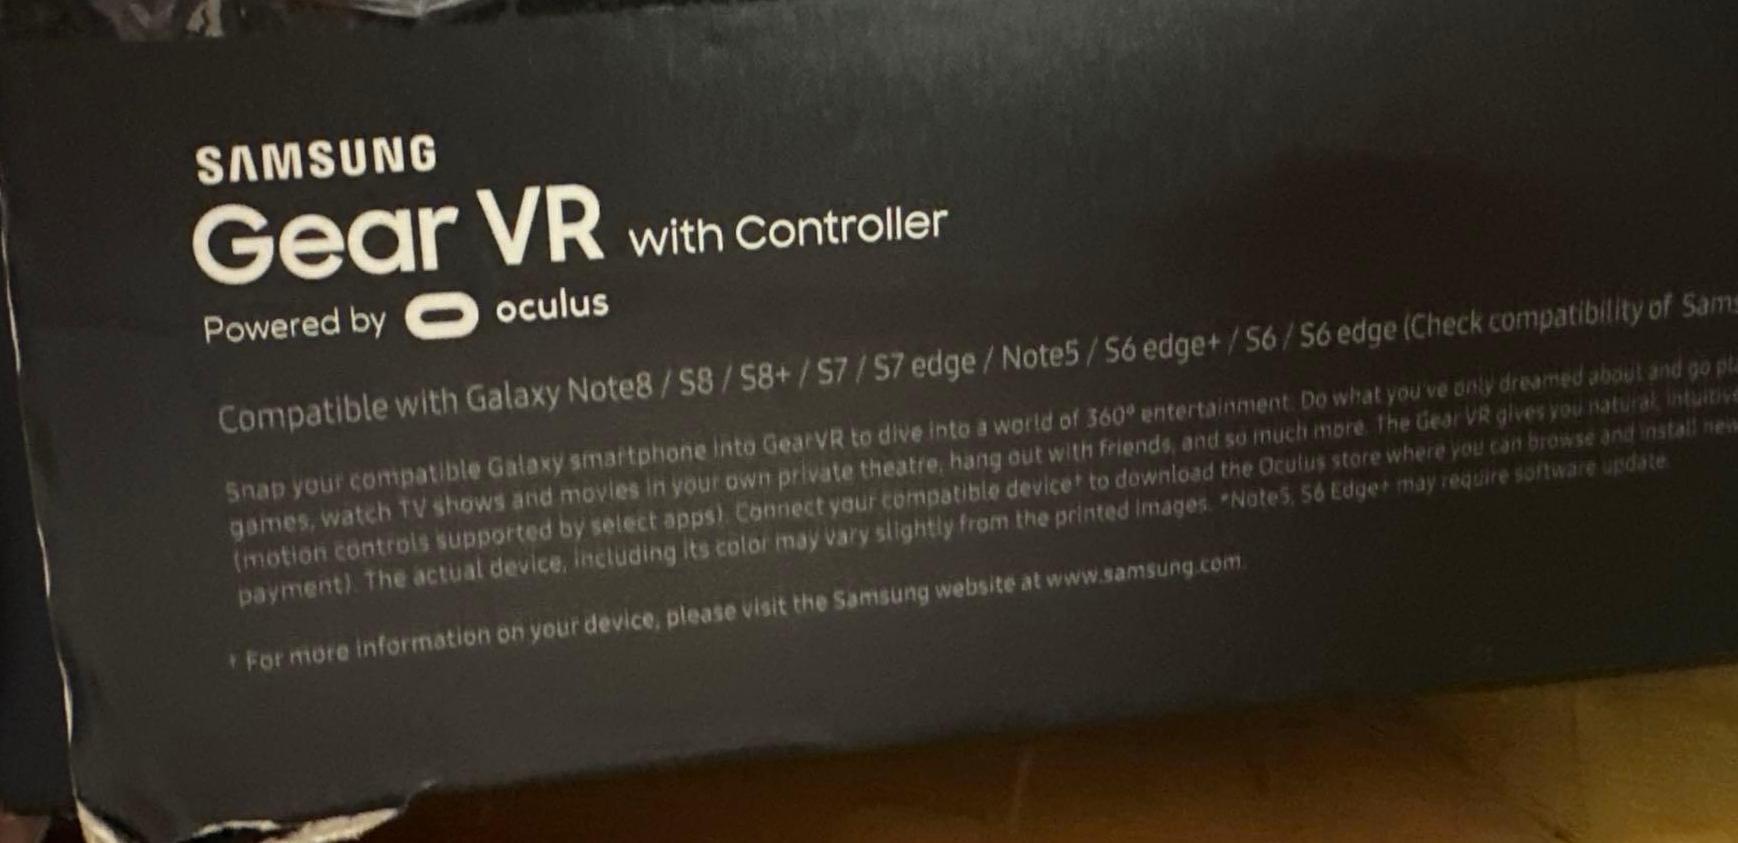 Samsung Gear VR with Controller Powered by Oculus- looks to be new